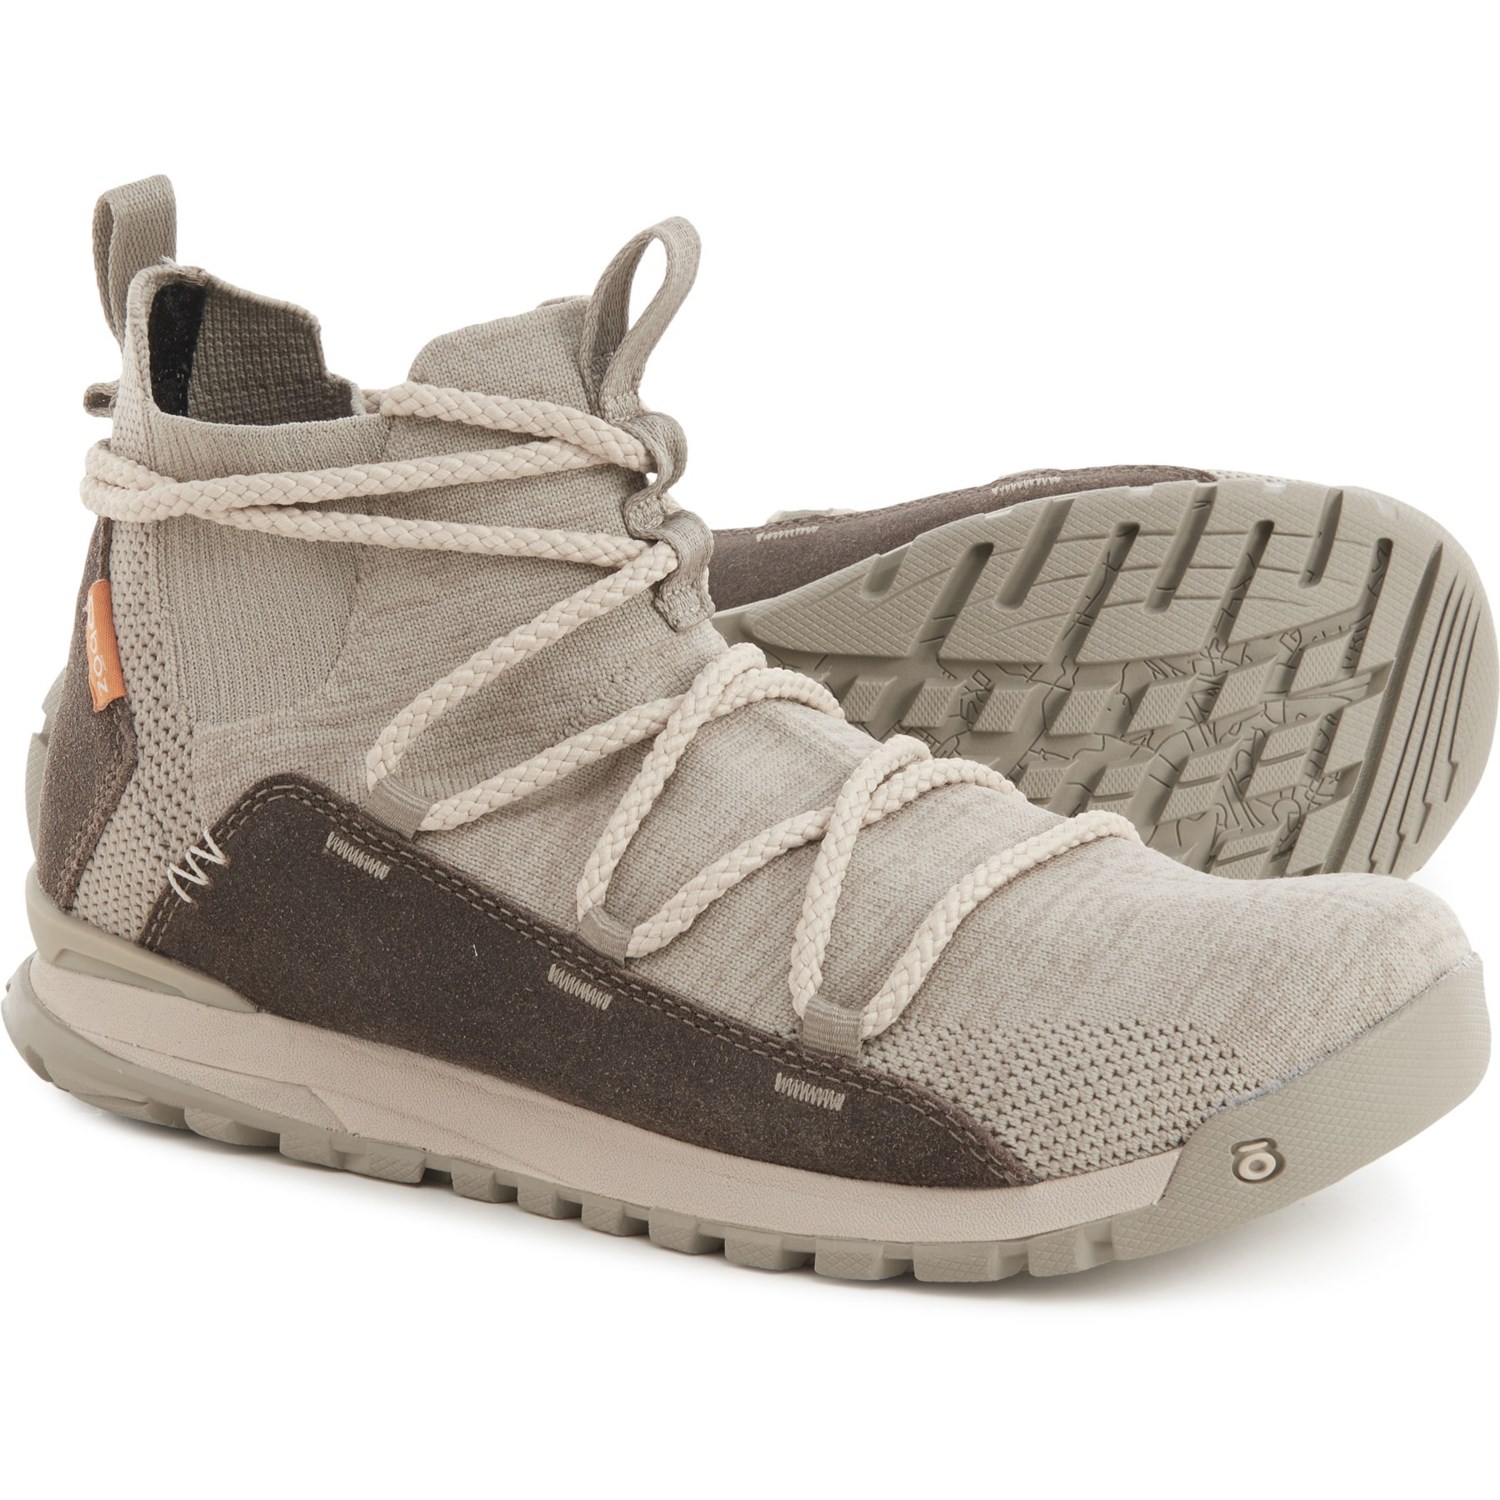 Oboz Footwear Lena Mid Hiking Boots - Slip-Ons (For Women)